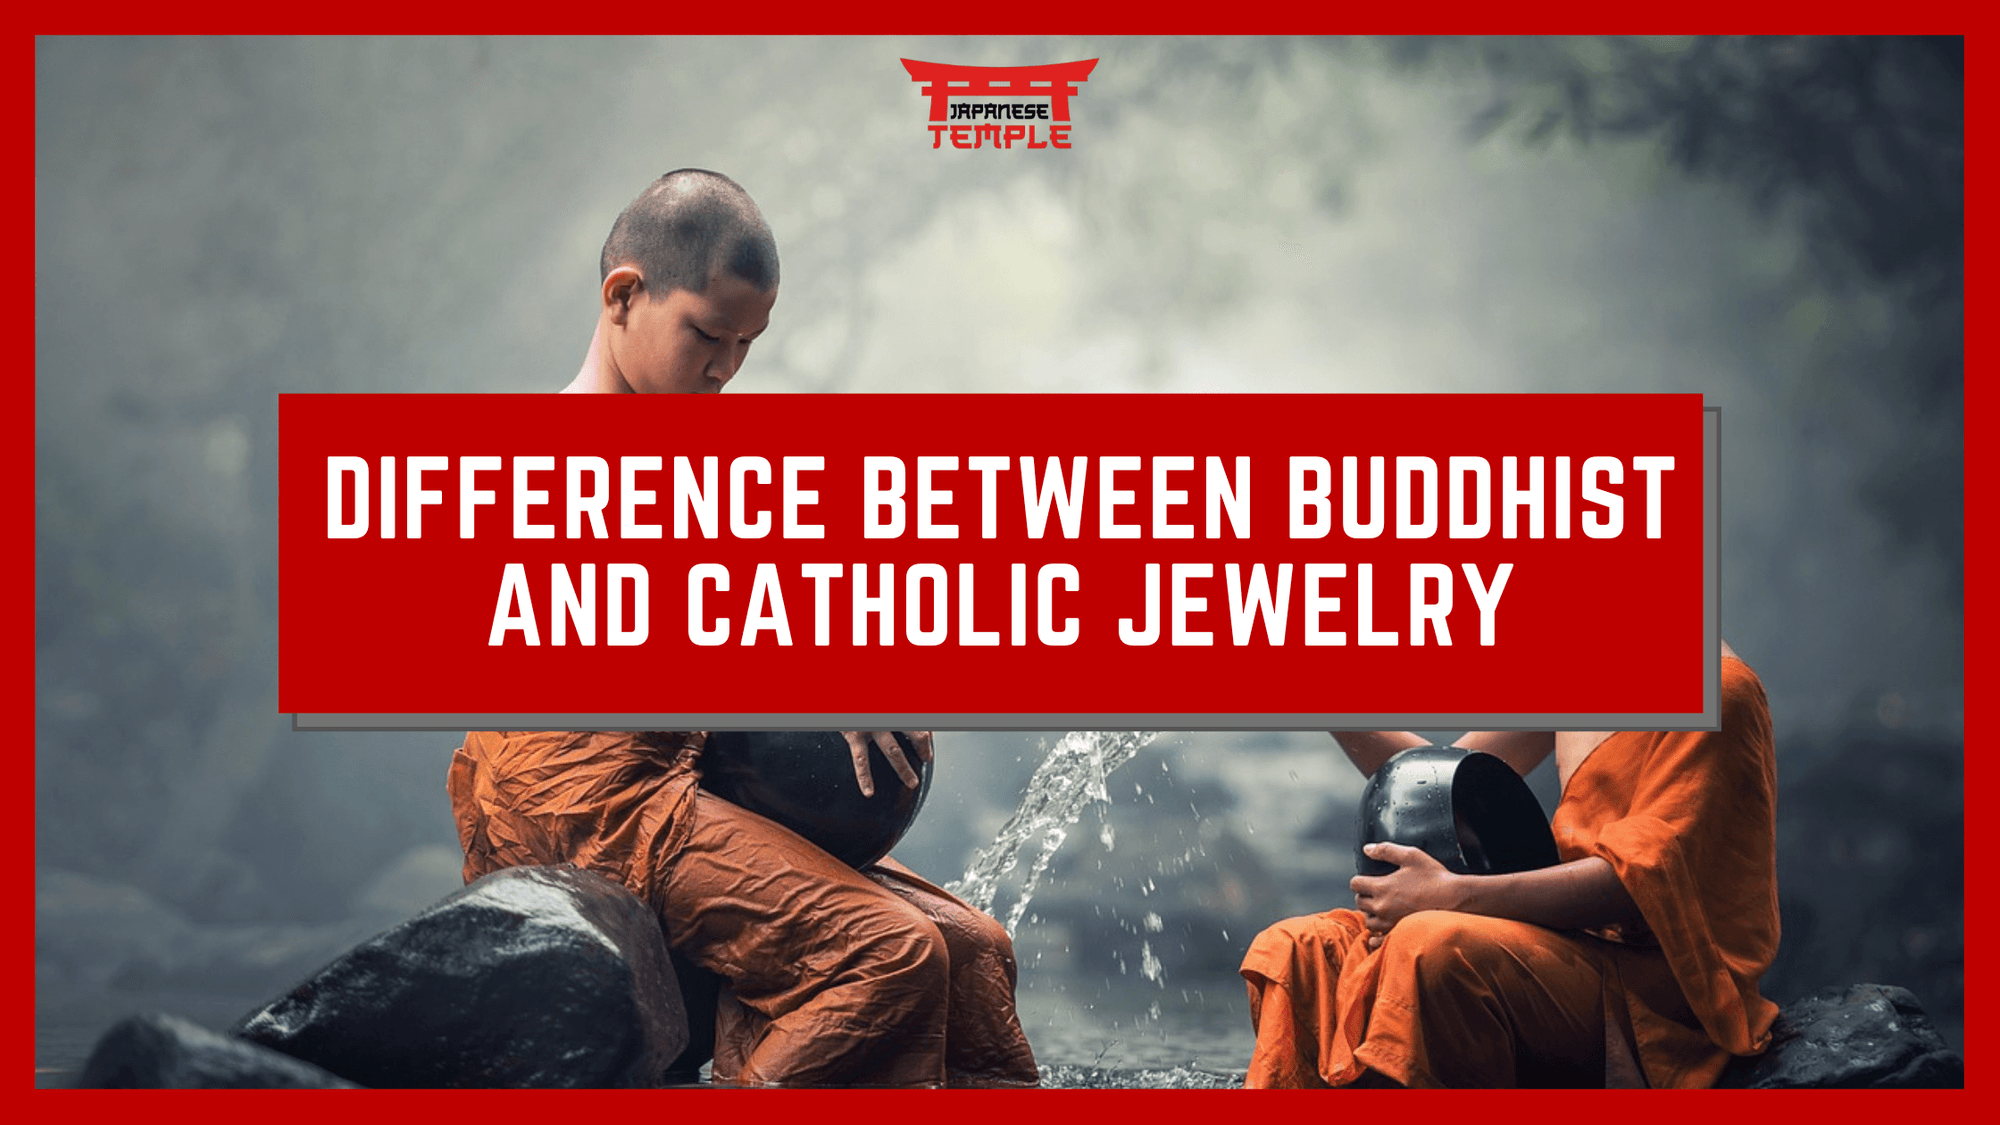 Difference between Buddhist and Catholic jewelry